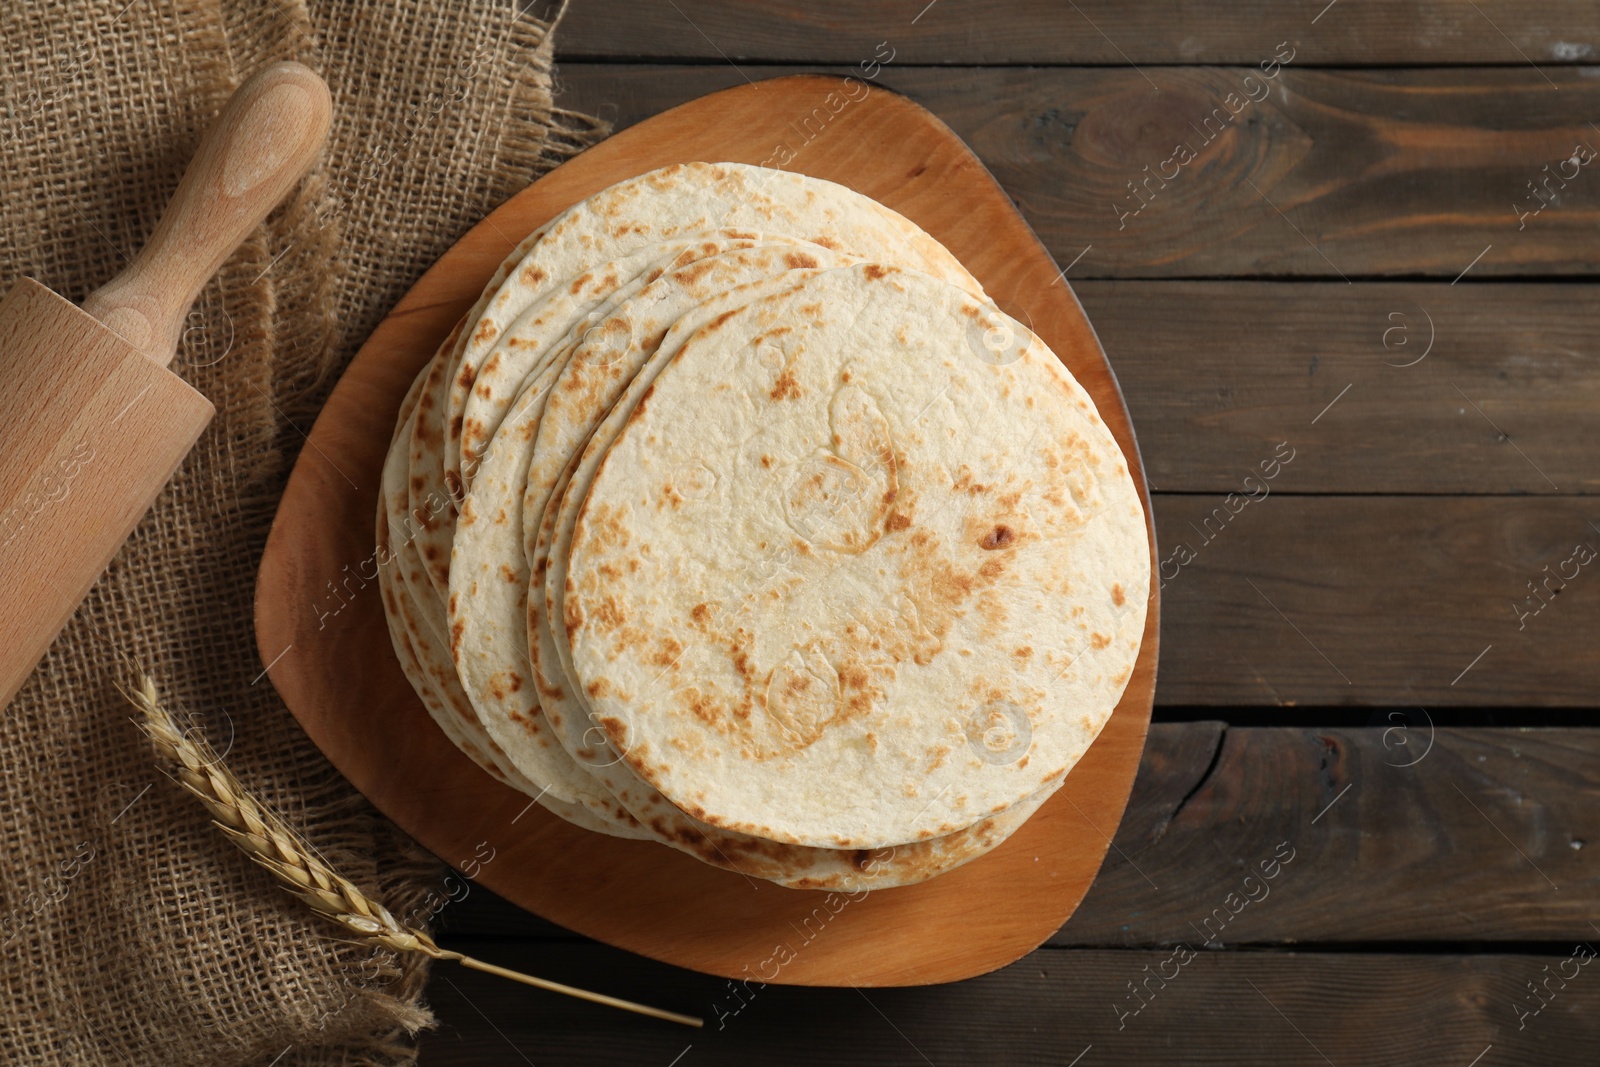 Photo of Many tasty homemade tortillas and rolling pin on wooden table, top view